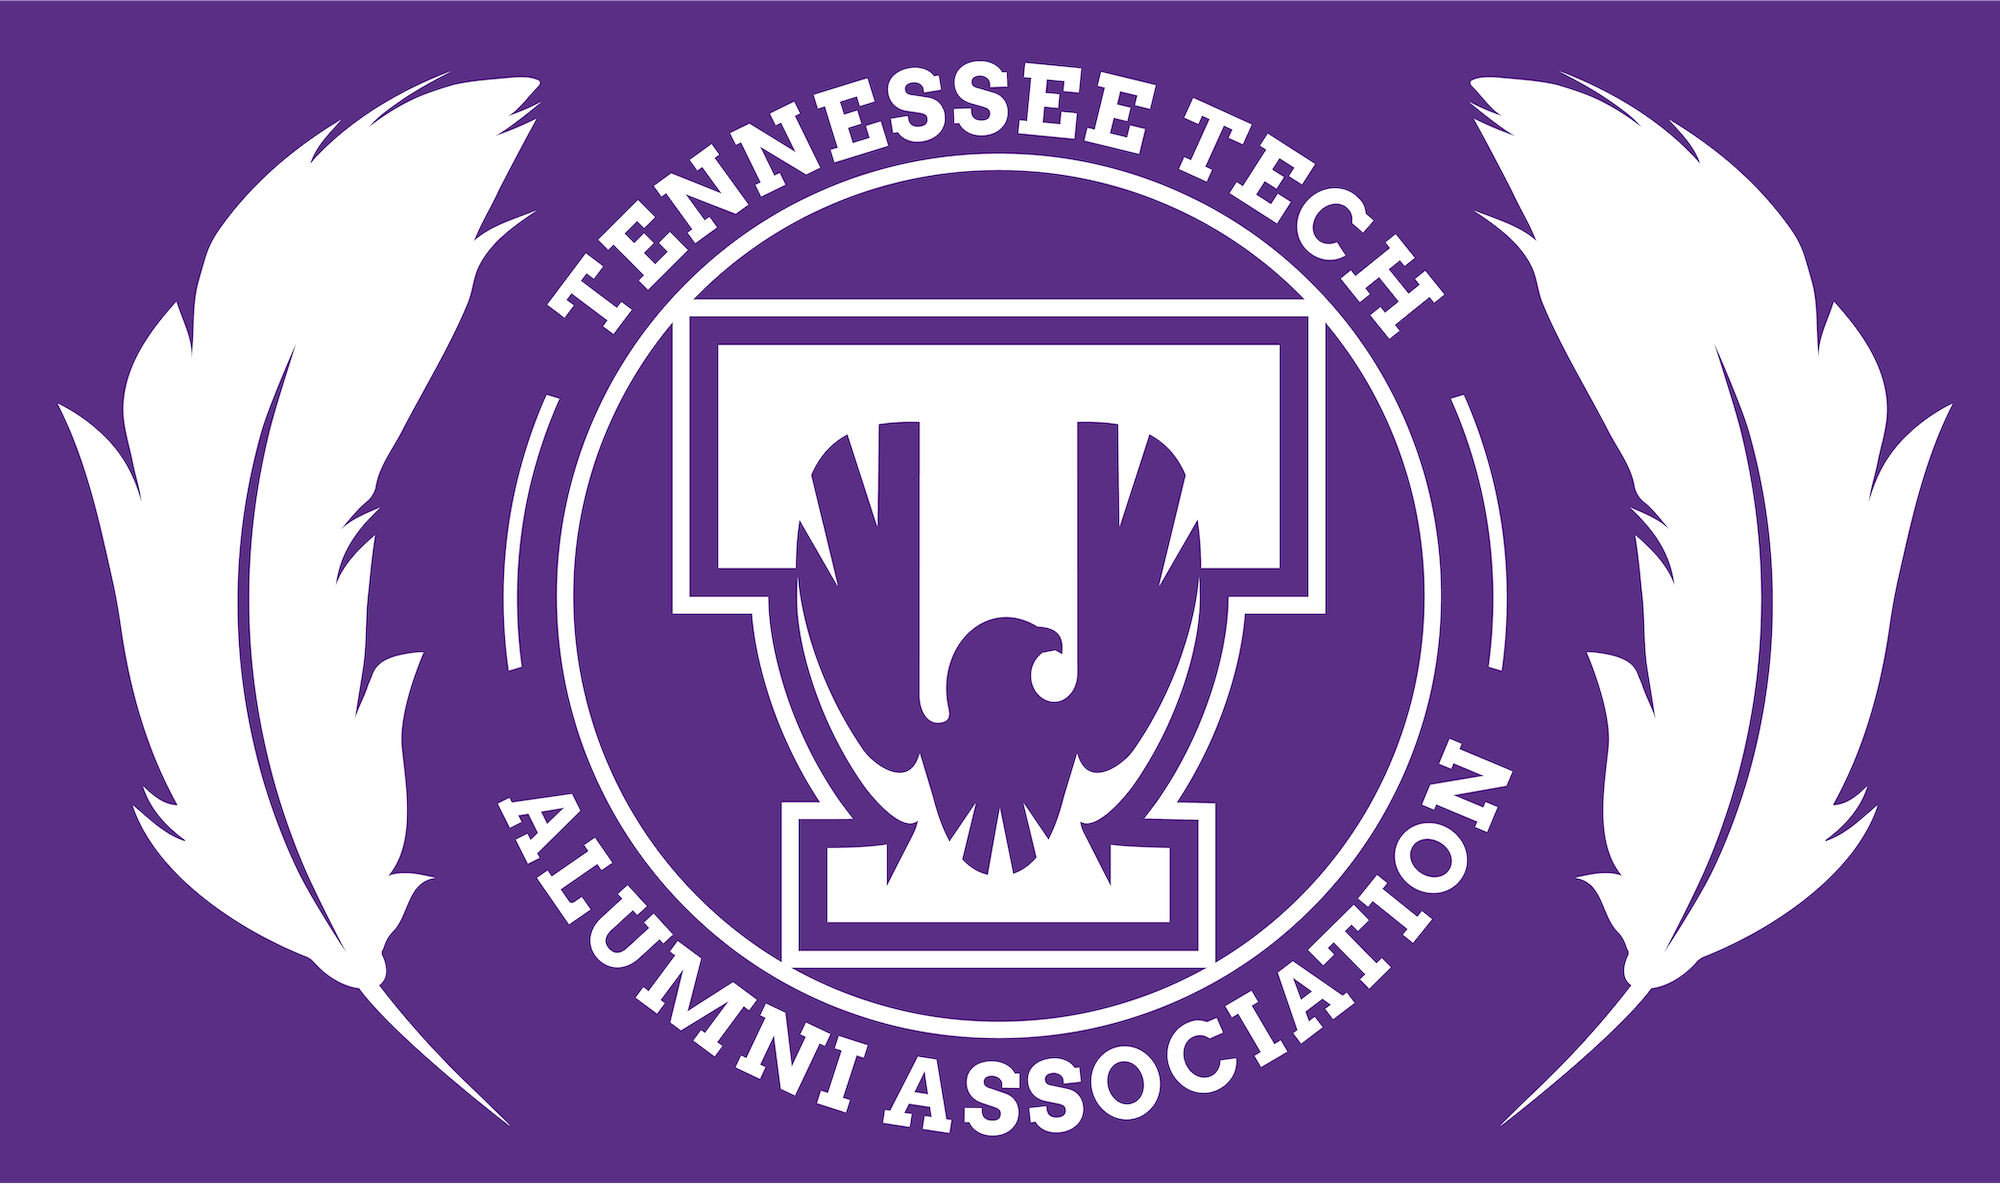 A purple background with a ӰƵ Alumni Association seal and two white feathers